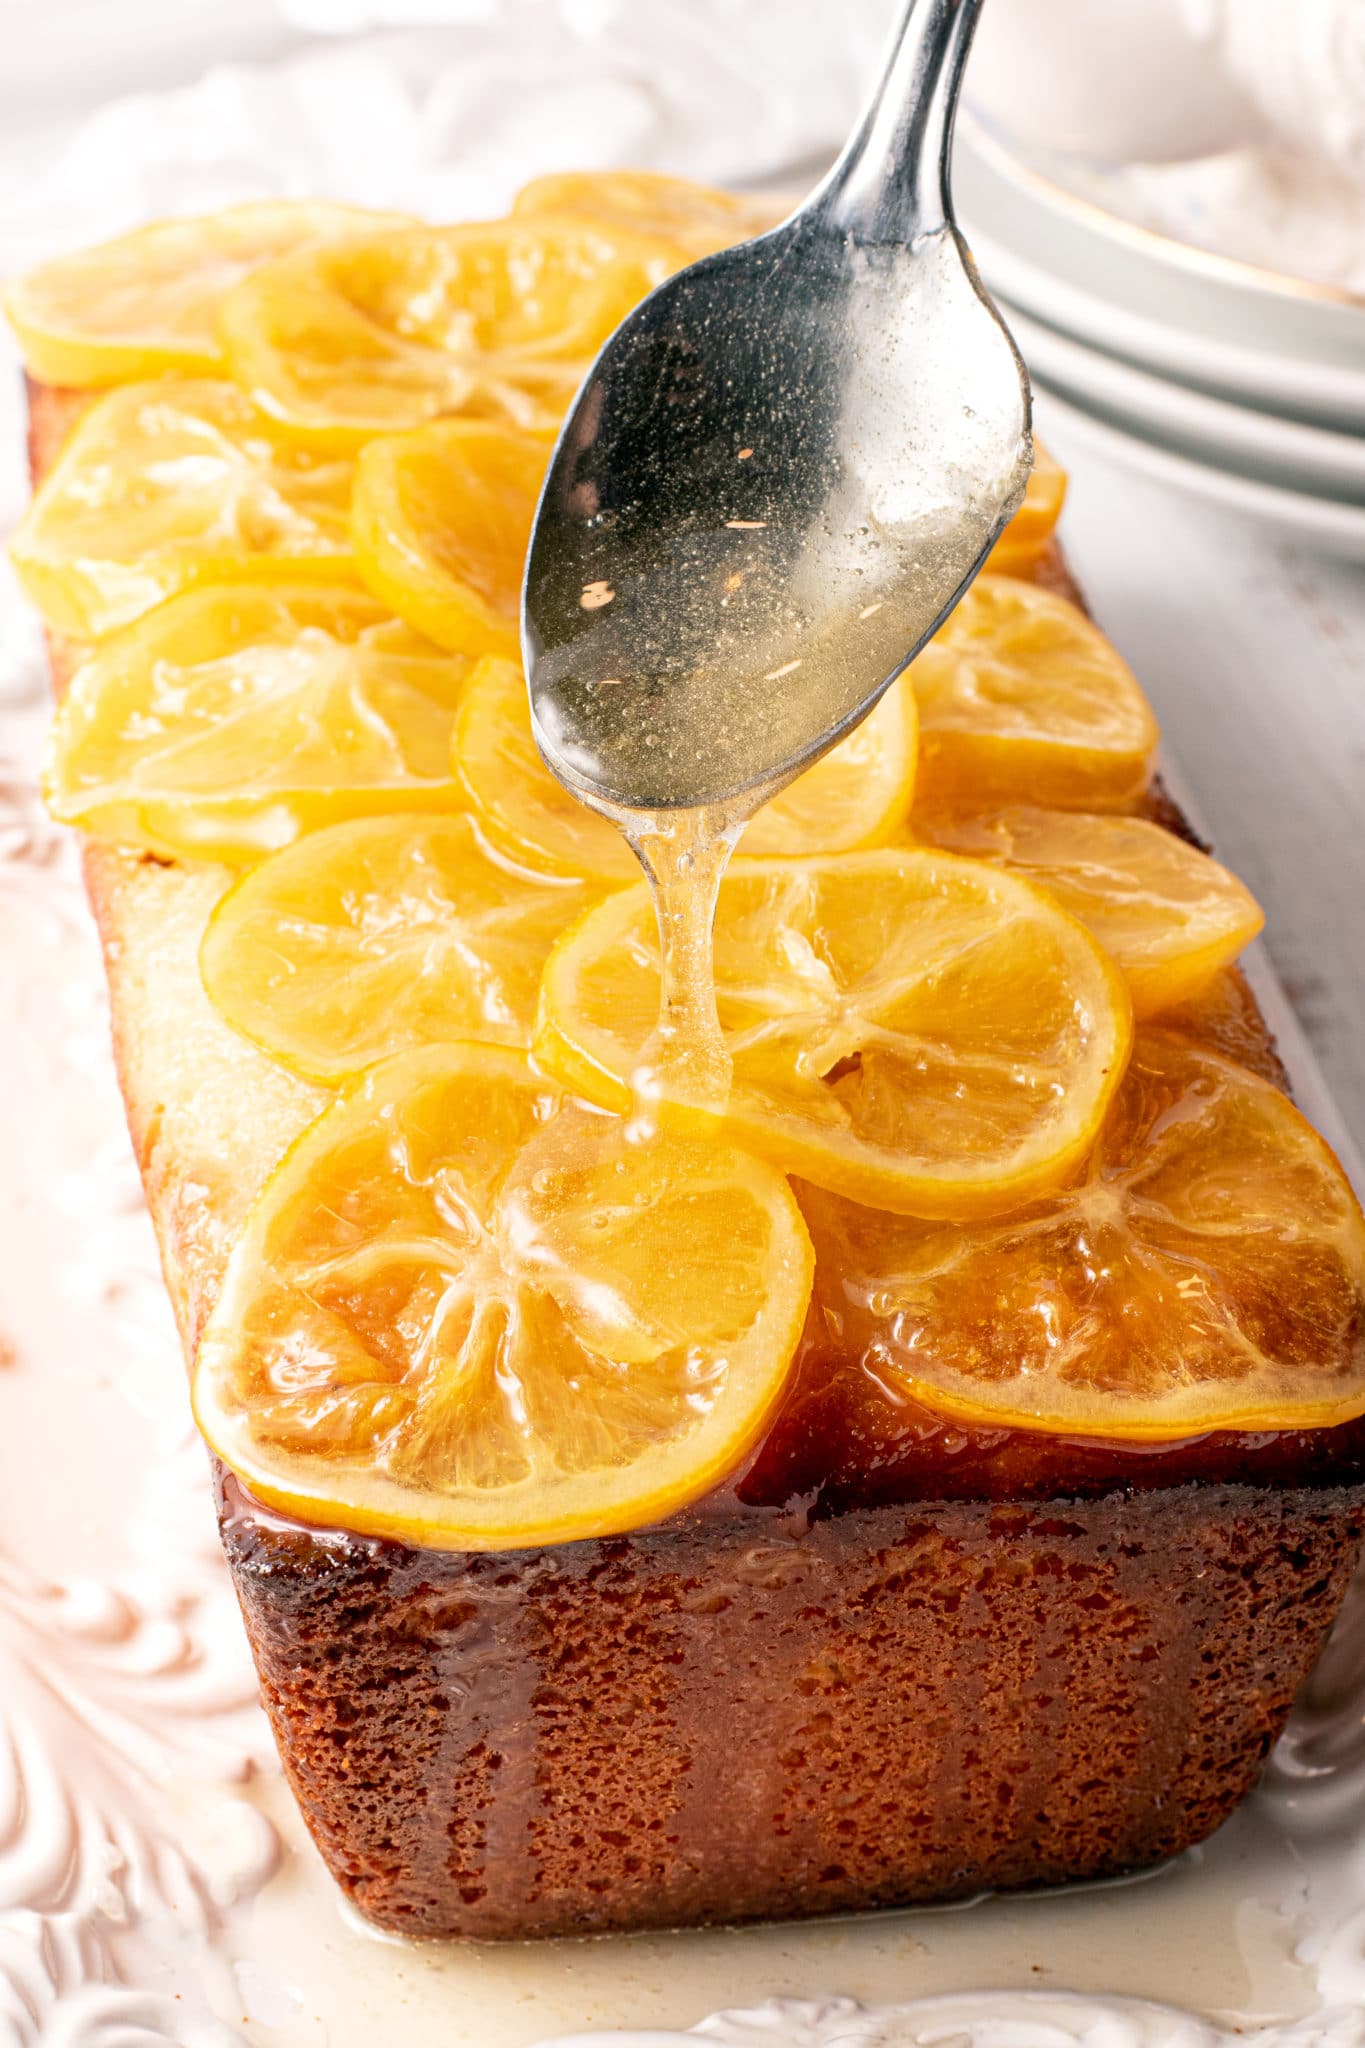 Syrup being drizzled over the candy lemons on the cake.